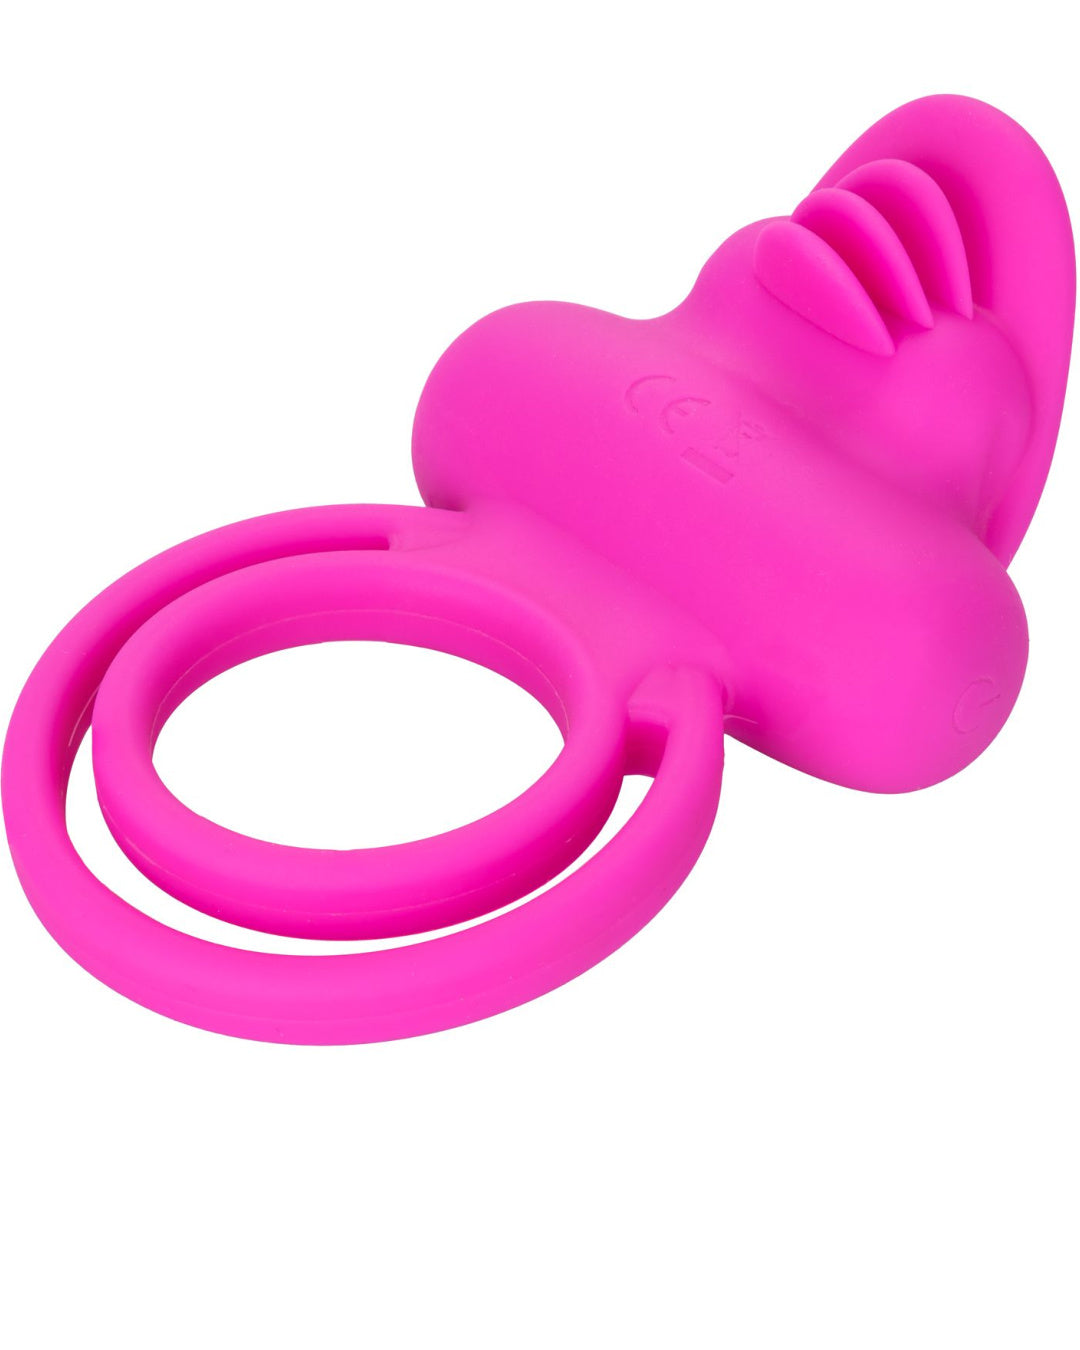 Silicone Dual Clit Flicker Rechargeable Cock Ring by Calexotics Top View